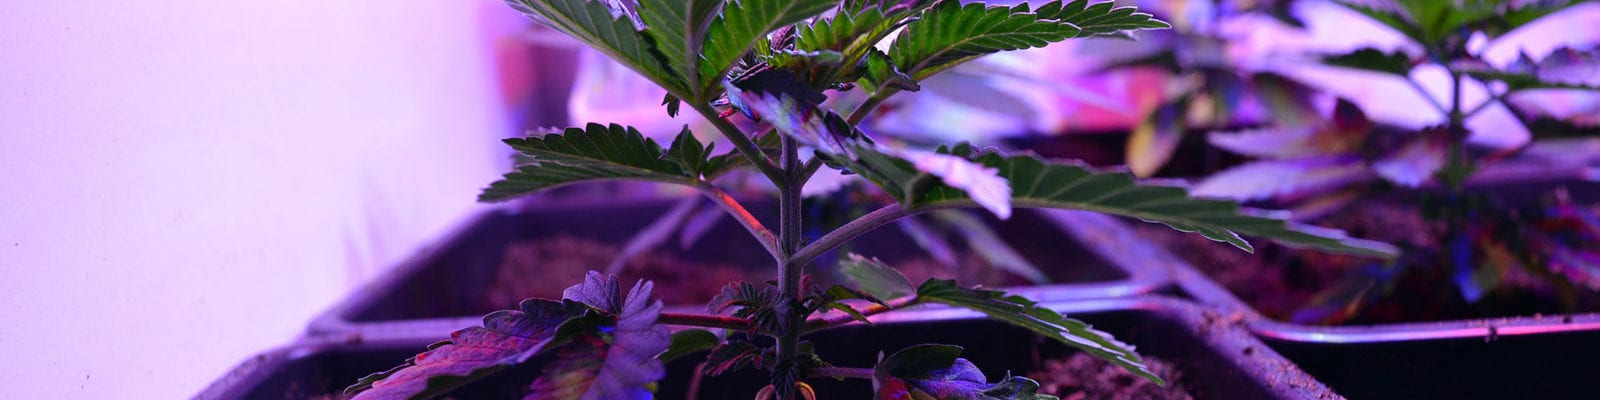 A young cannabis plant rests under the LED grow light of a cannabis patient's grow closet.